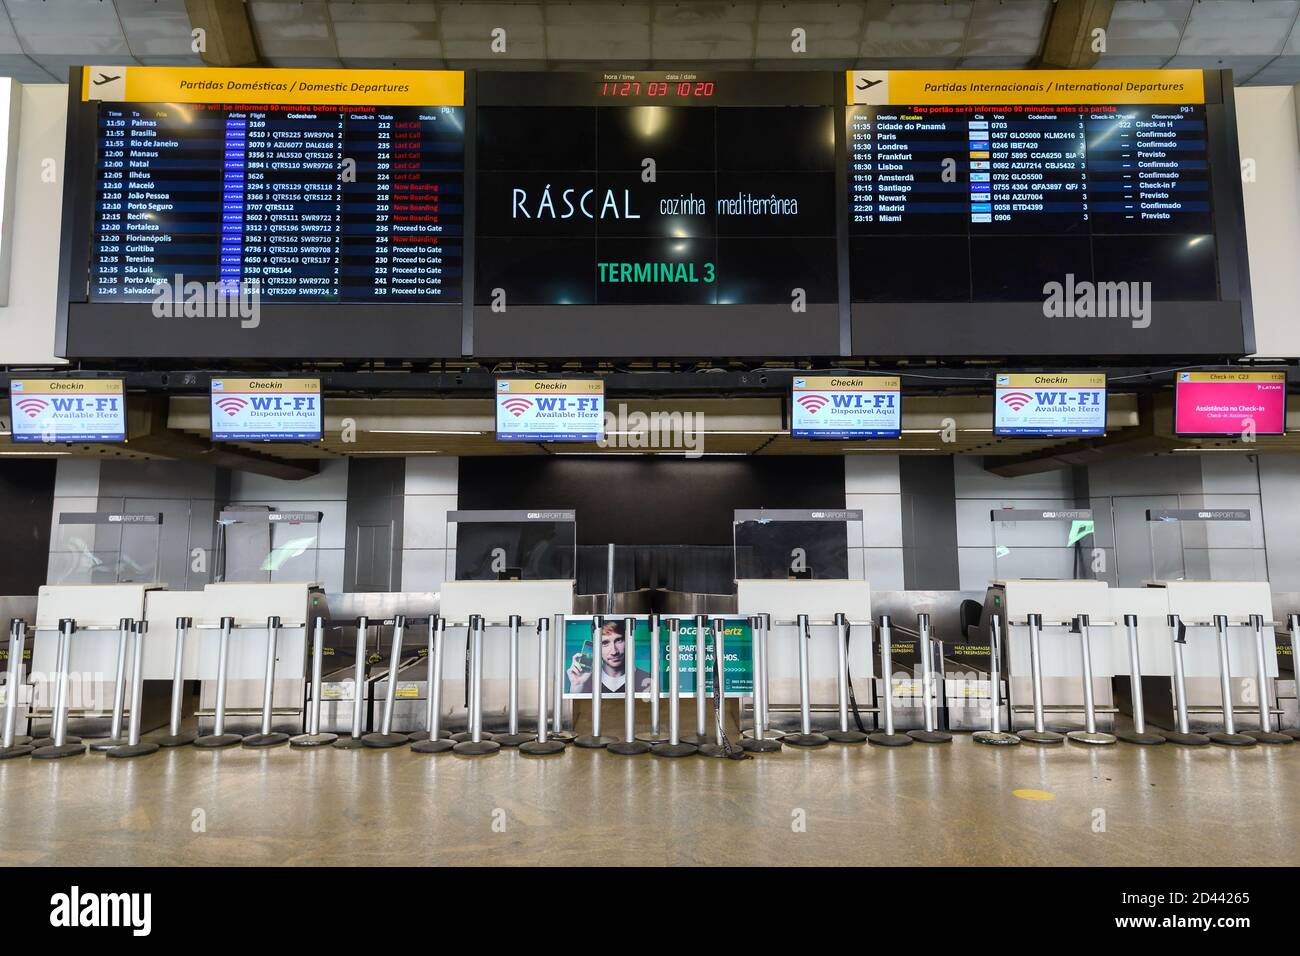 Check-in counters closed due to covid 19 pandemic. GRU Airport Terminal 2 hall empty. Sao Paulo Guarulhos Airport during coronavirus with low demand. Stock Photo